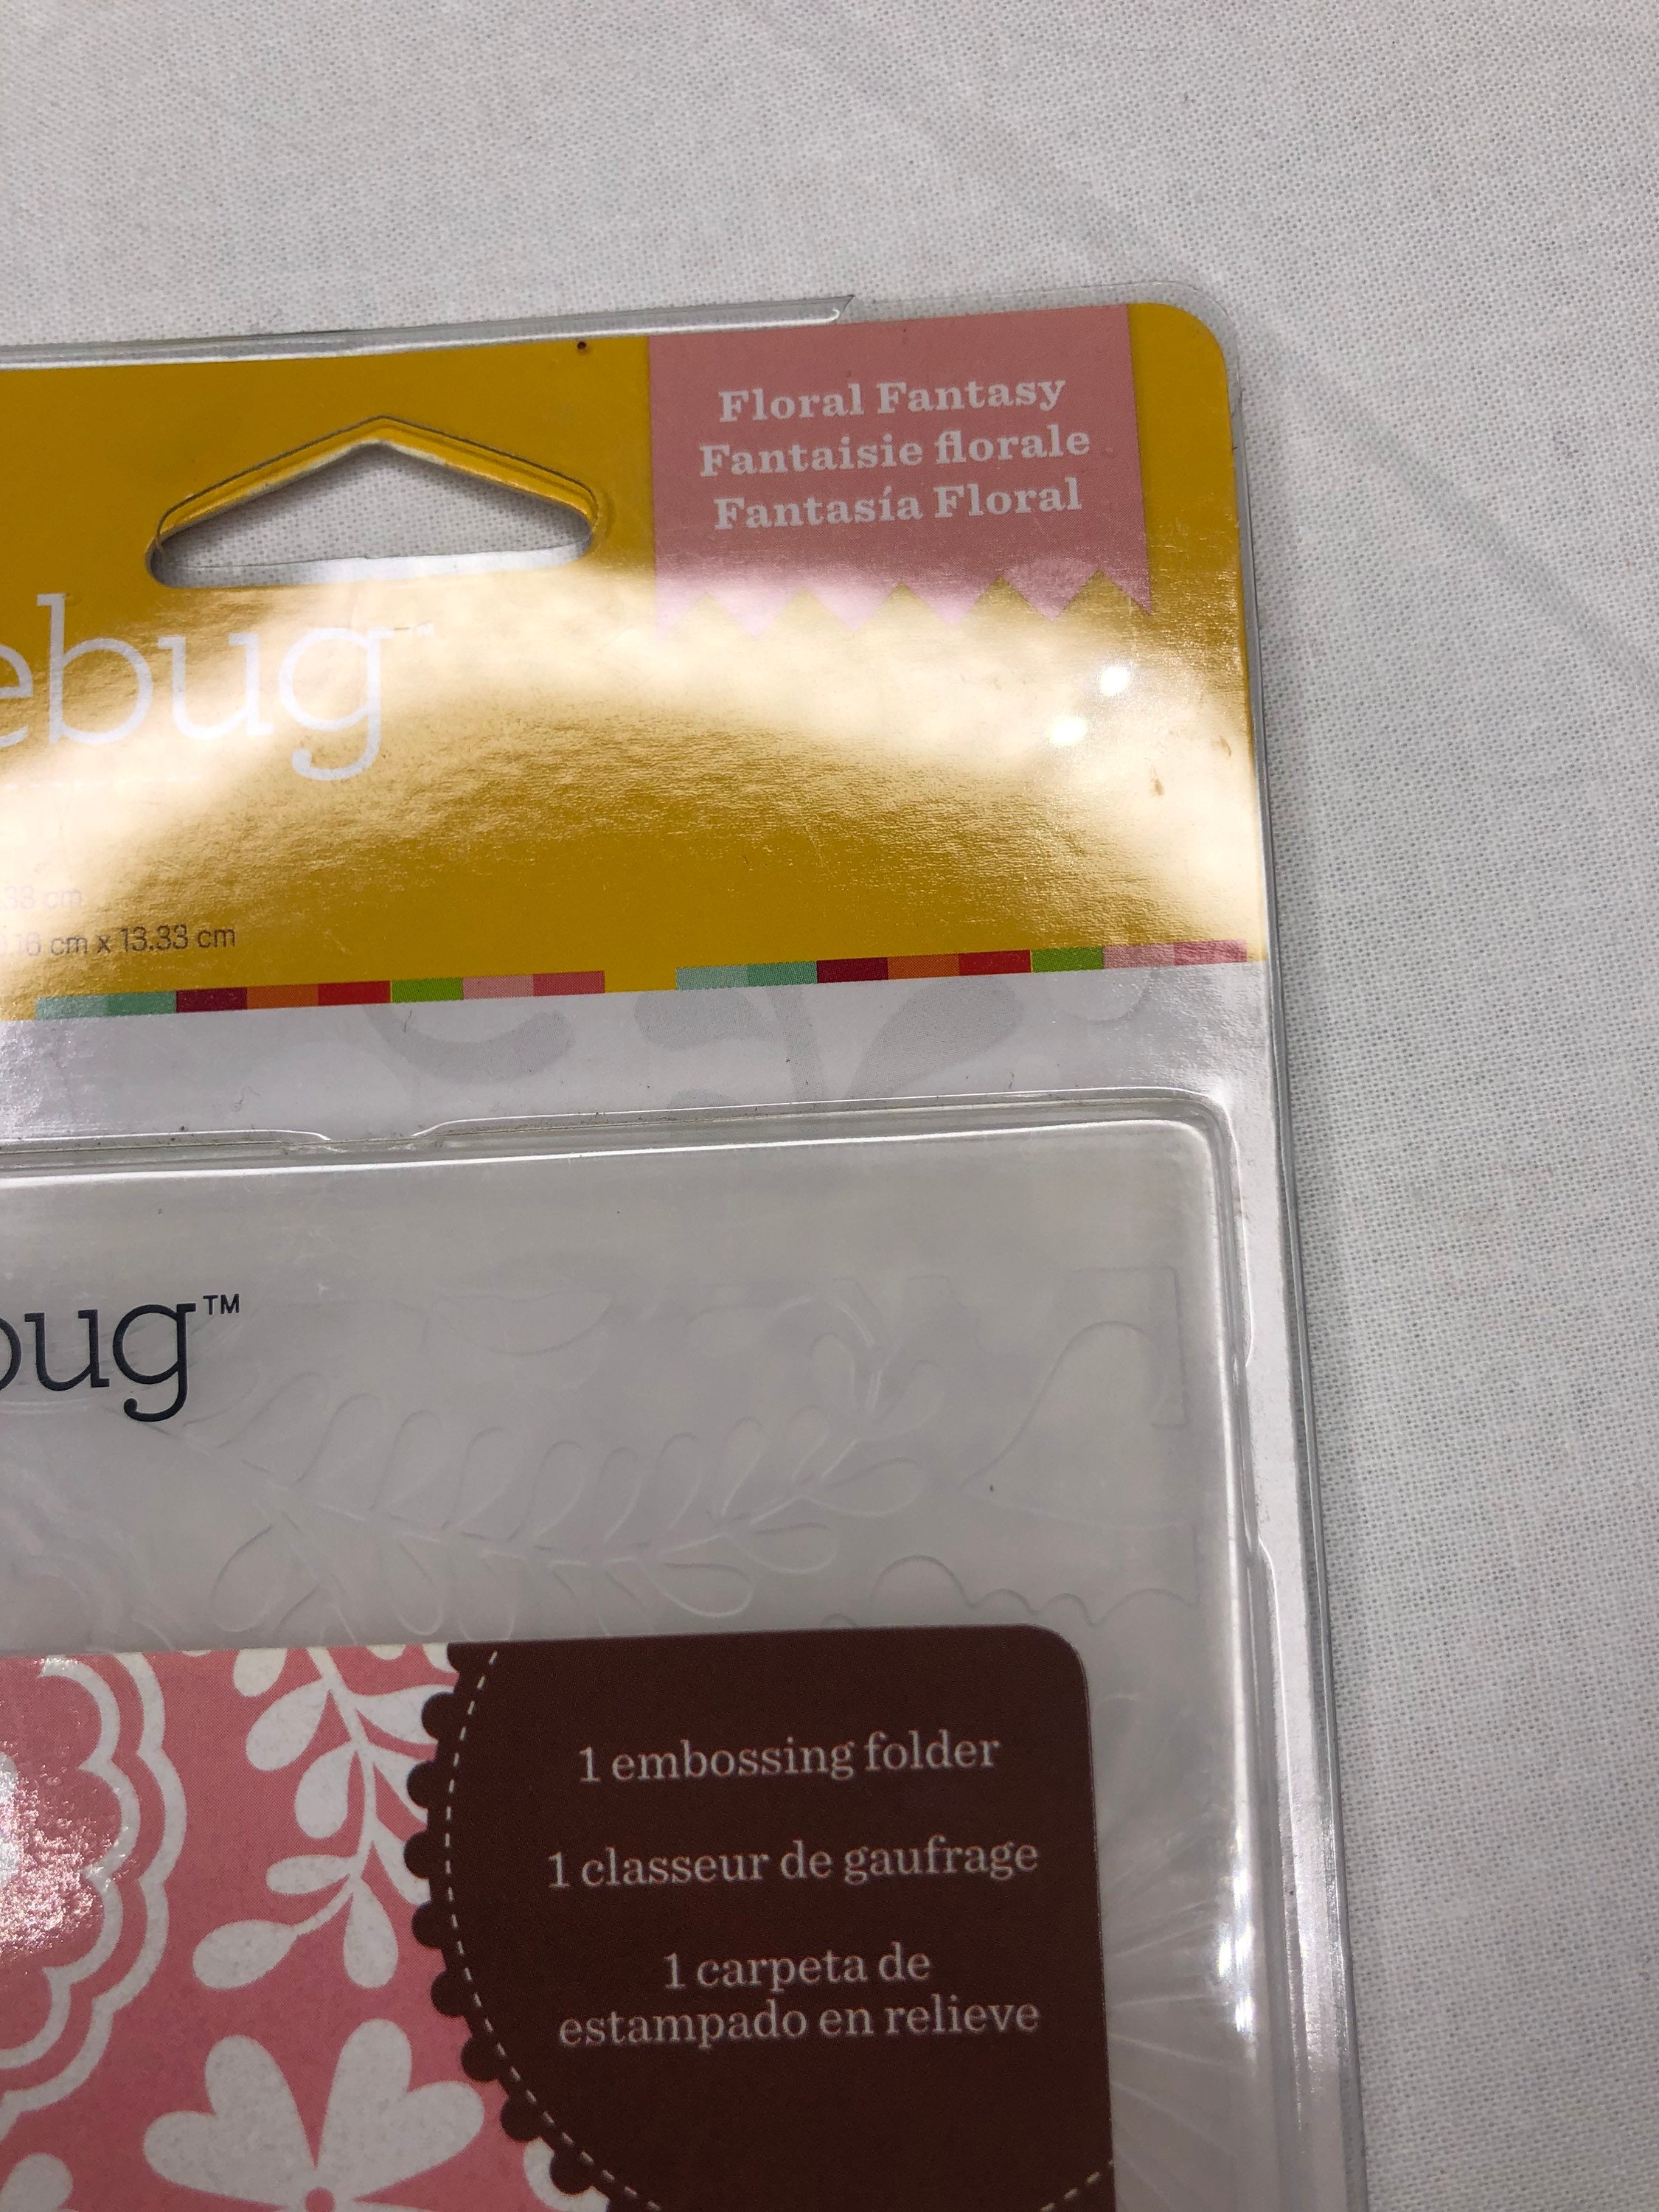 Cricut Cuttlebug Embossing Folders New in Packaging Includes Floral Fantasy  and Herringbone. Great Value 